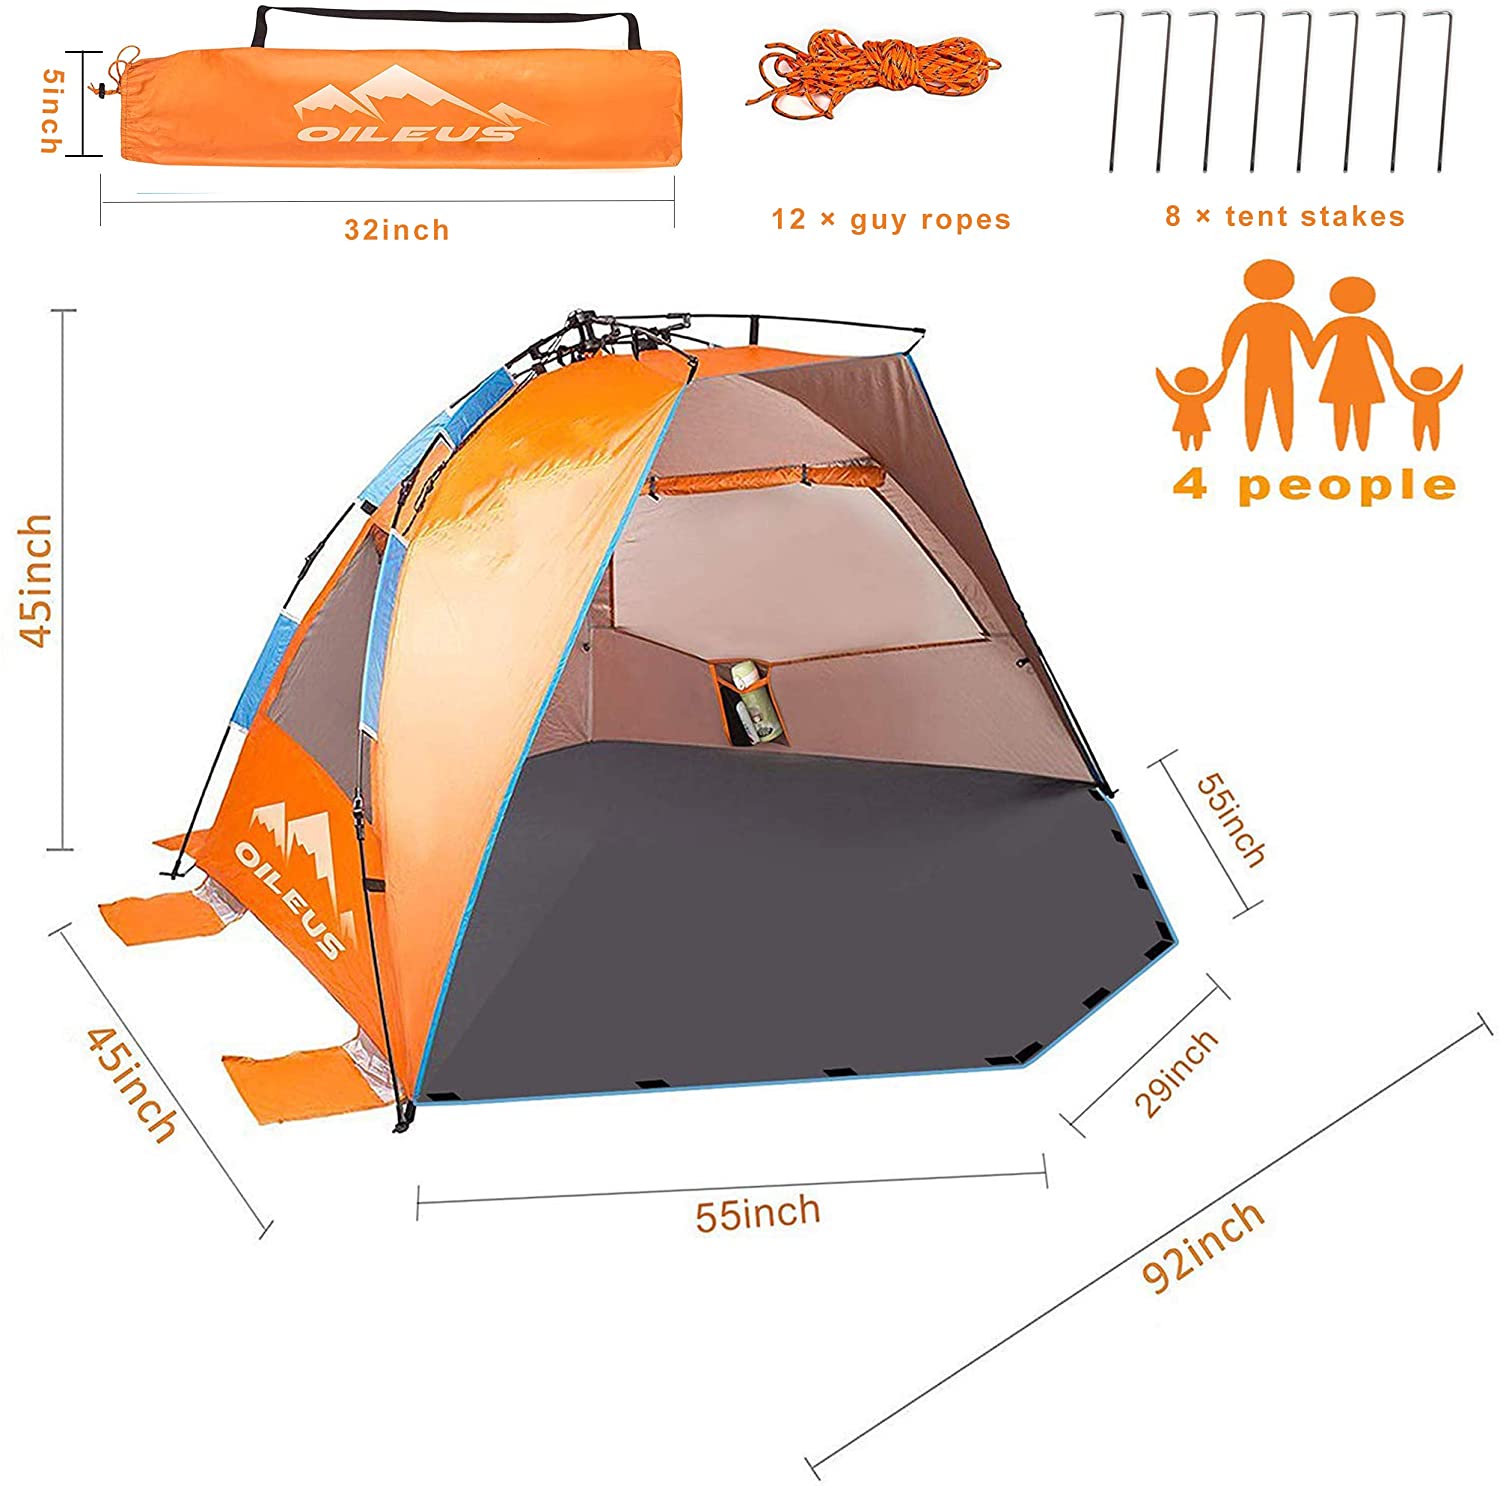 Oileus Beach Tent X-Large 4 Person Tent Sun Shelter, Portable Sun Shade, Pop Up Tents for Beach with Carry Bag, Stakes, 6 Sand Pockets, Anti UV for Fishing Hiking Camping, Waterproof Windproof, Orange - image 5 of 7